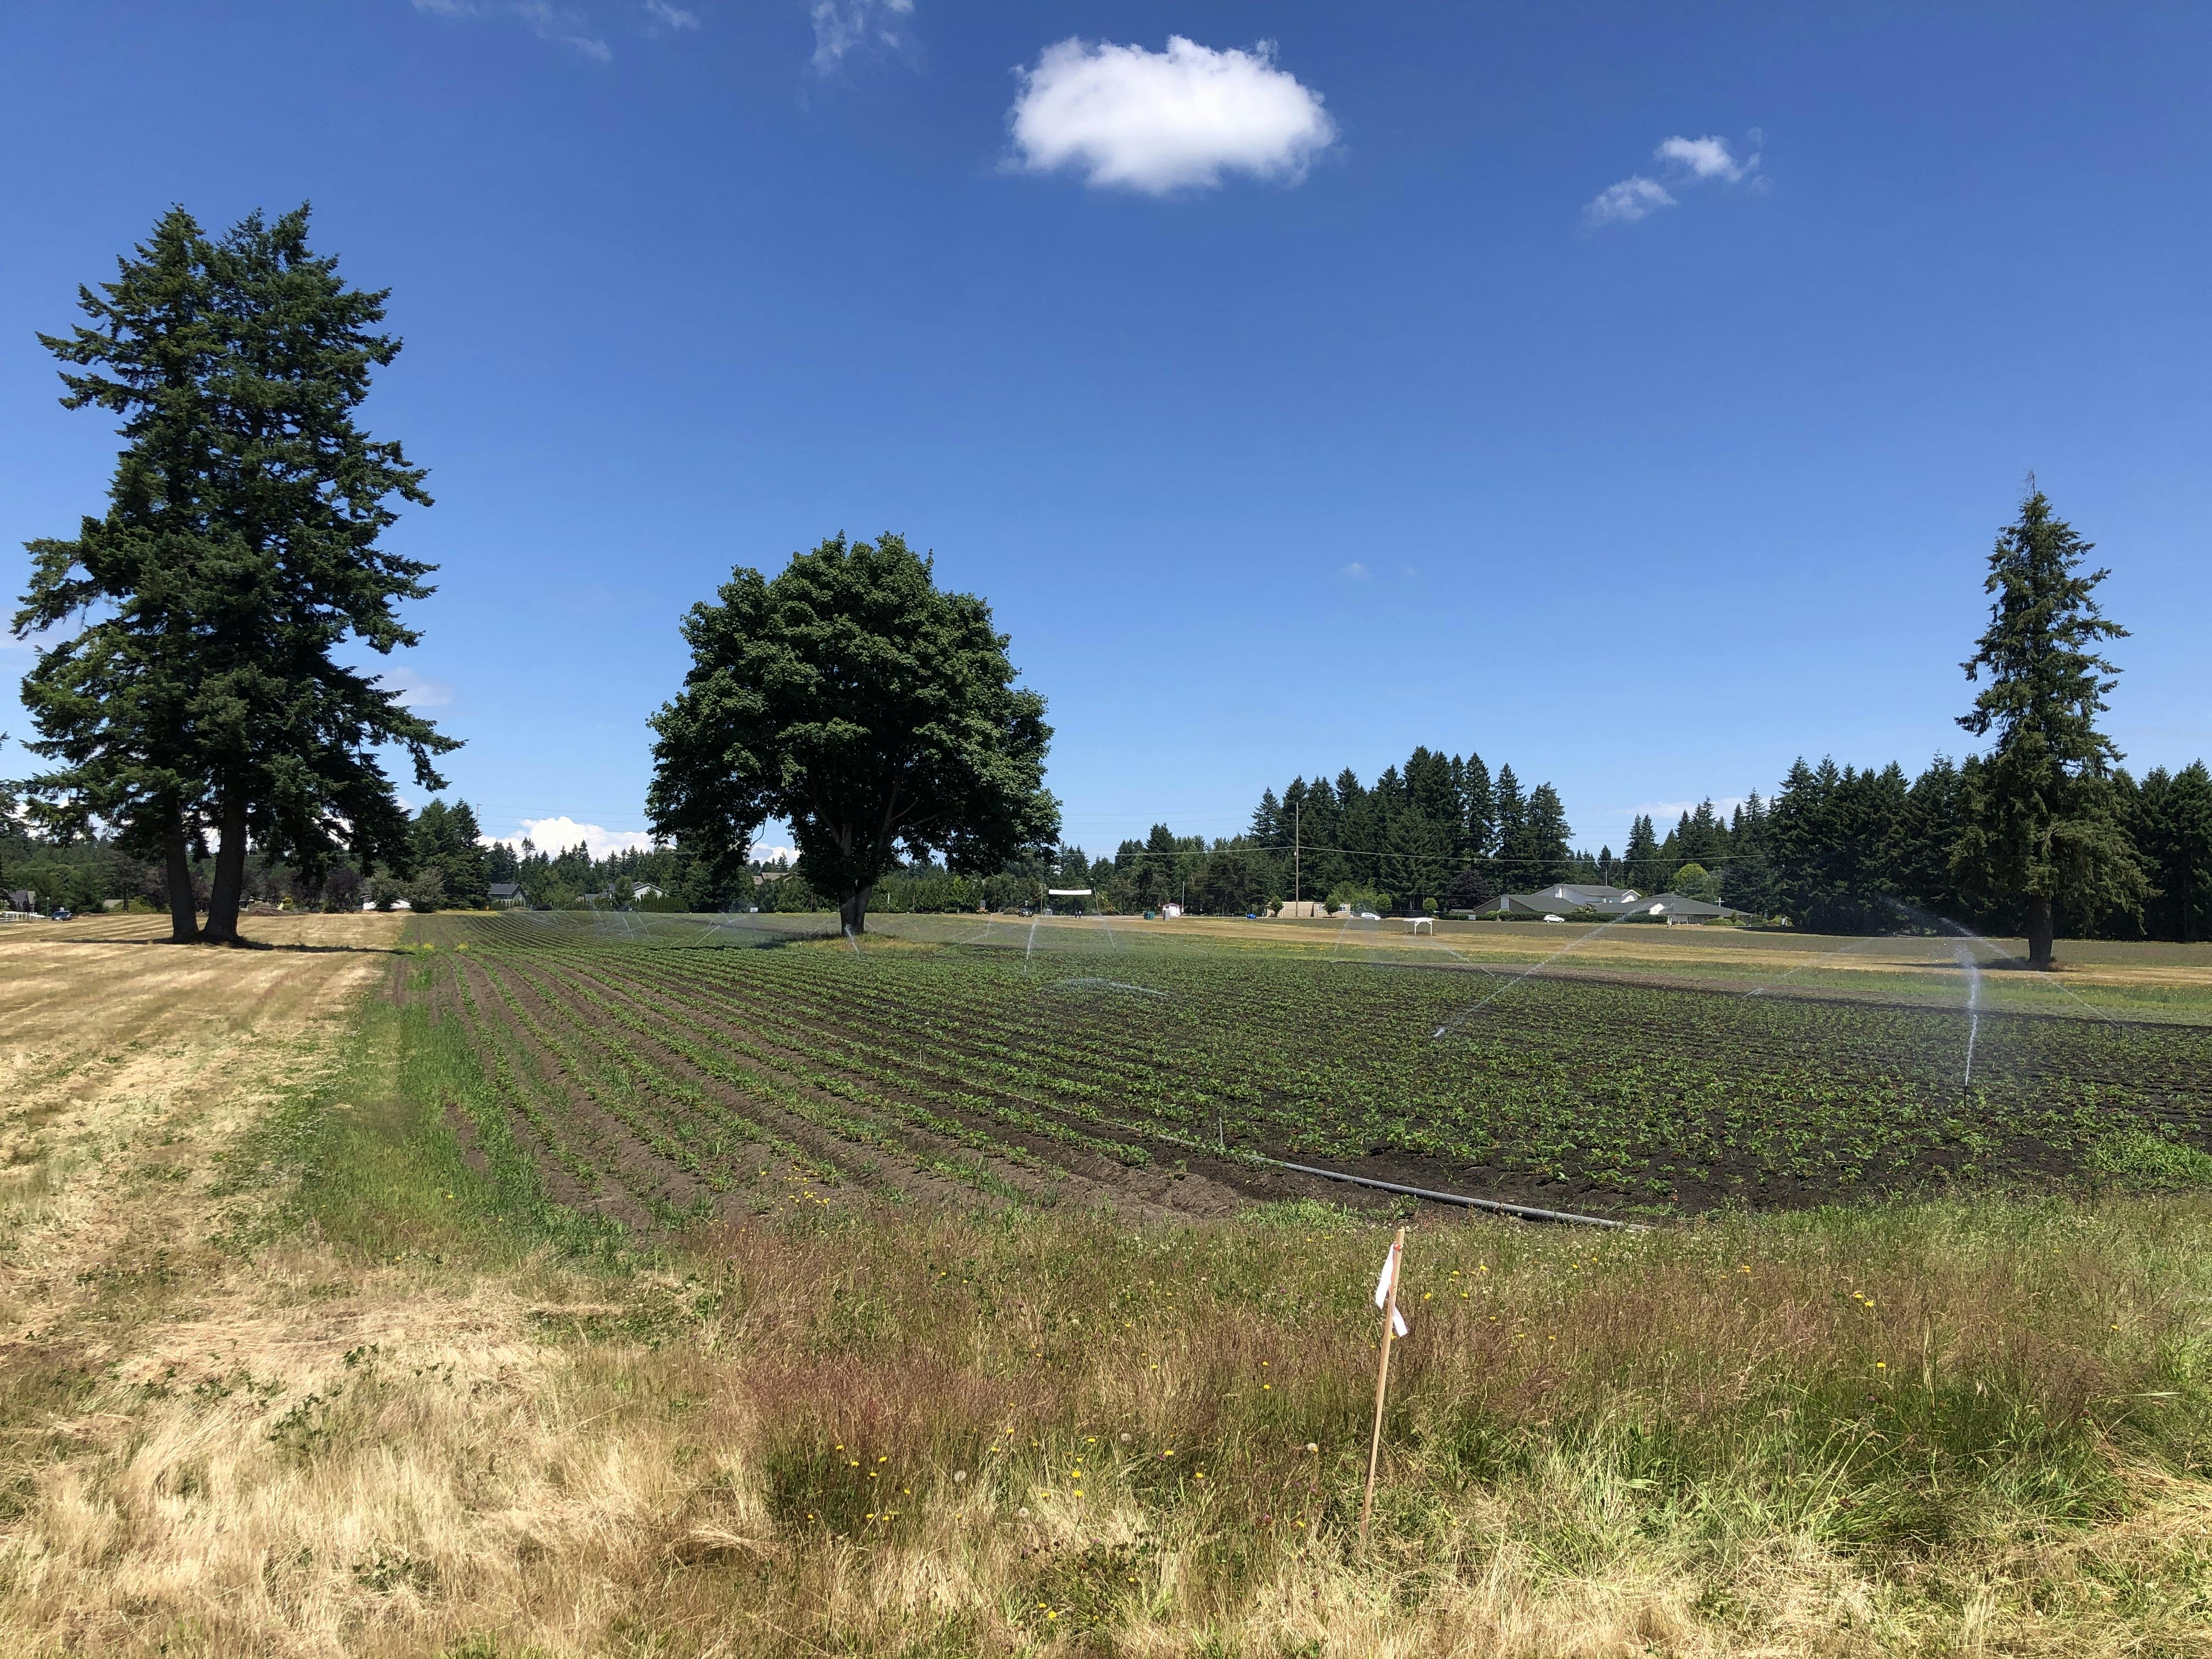 Strawberry field at Yelm Highway Community Park site